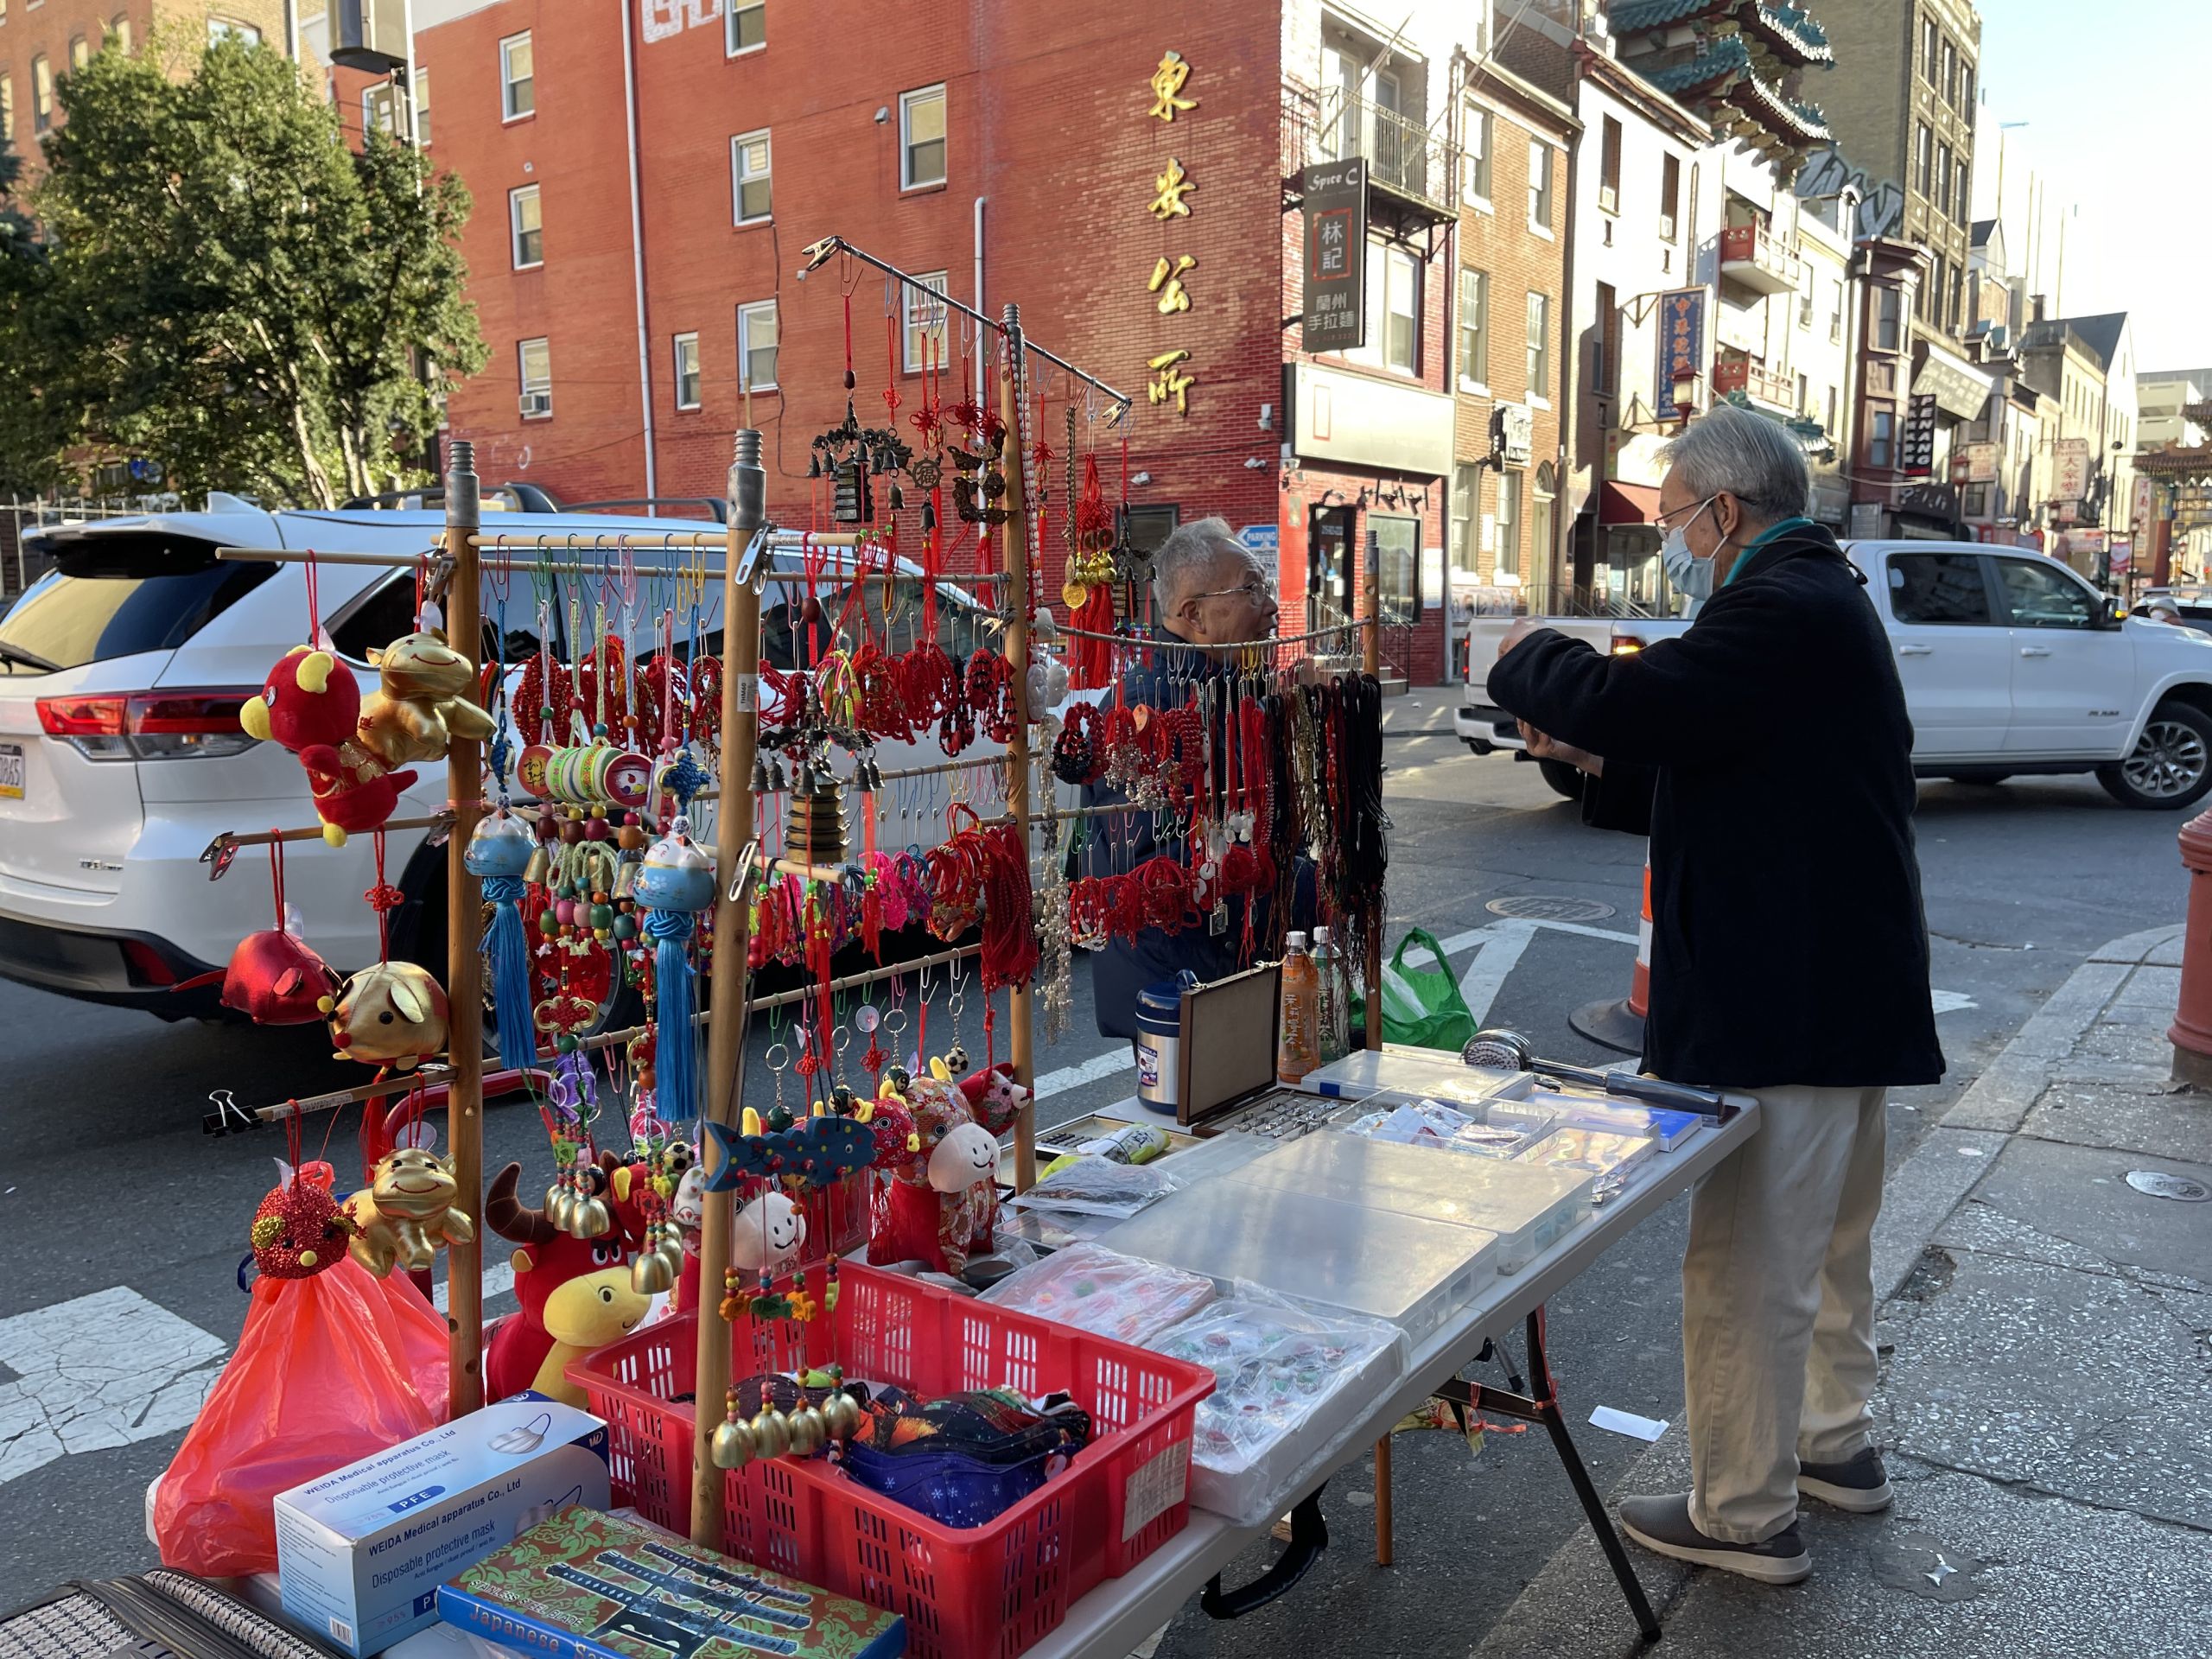 Chinatown is home to many vendors that add to the culture and community of Chinatown. Photo by Victoria Emmitt.